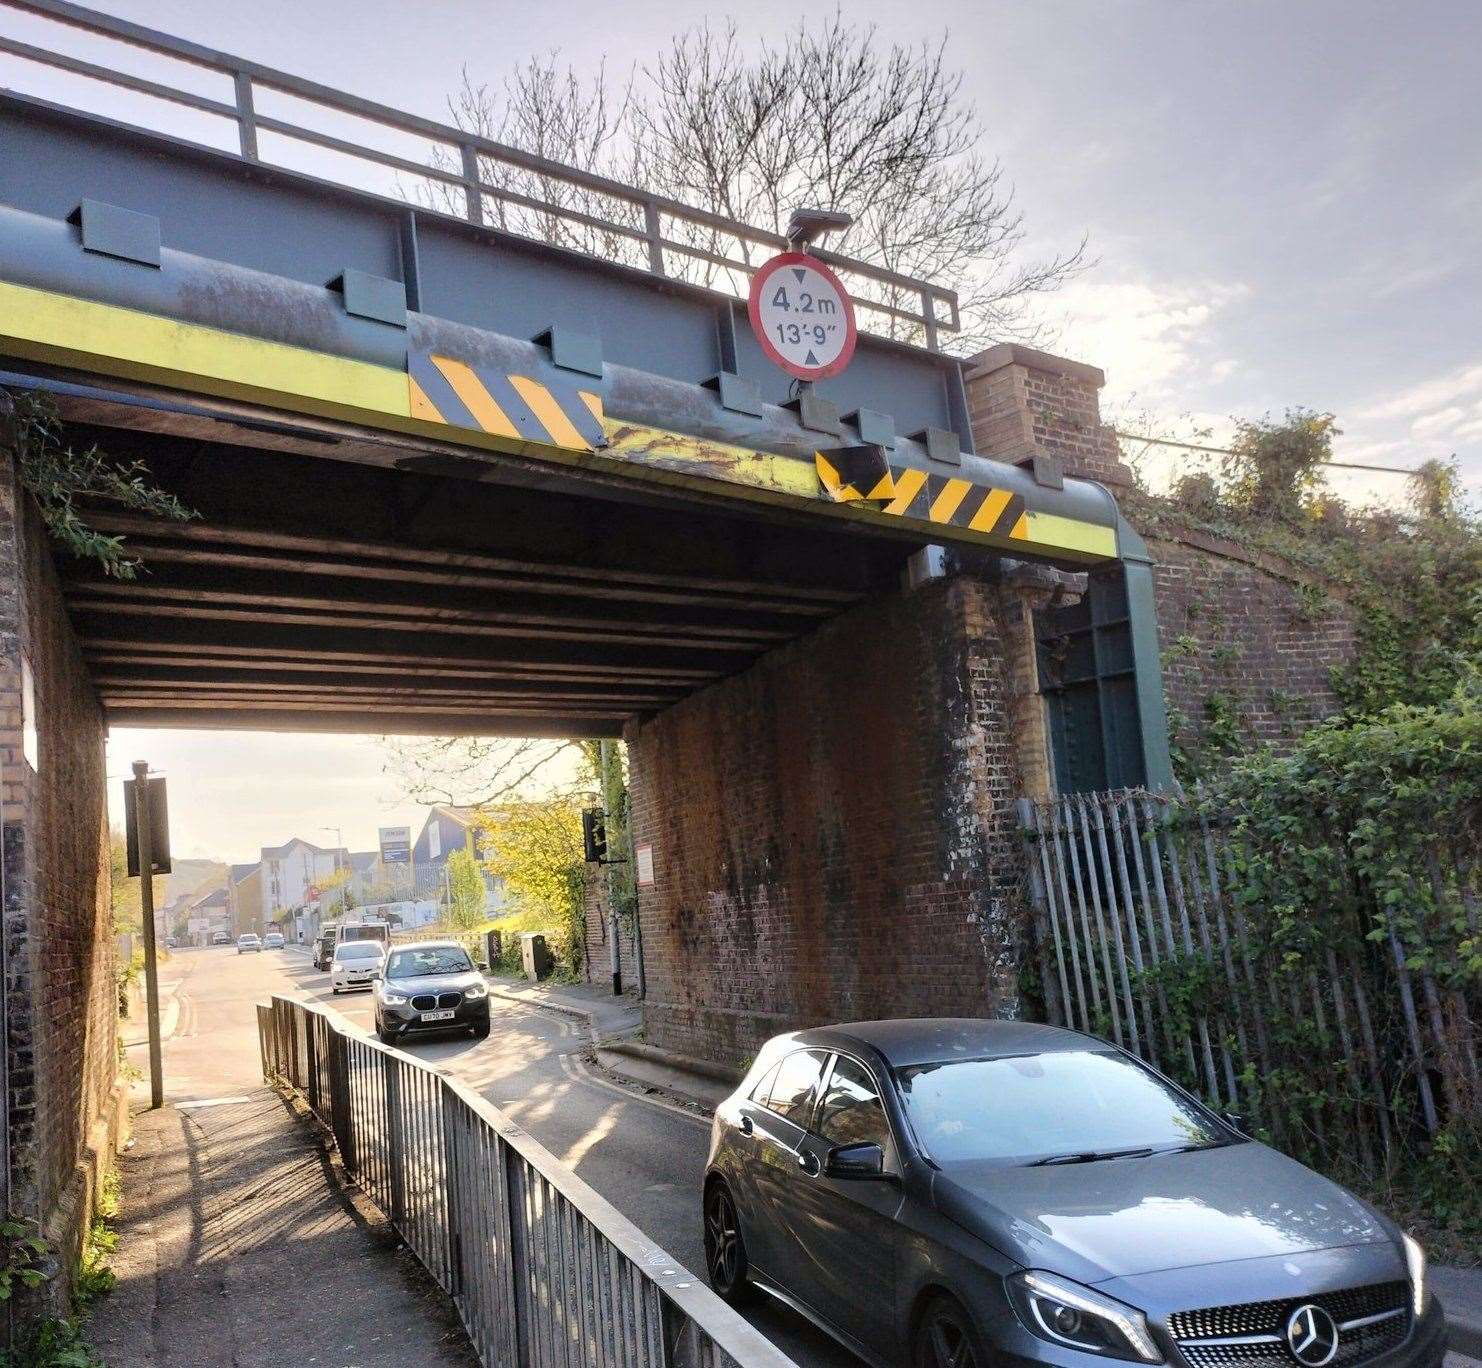 The low bridge in St Radigunds Road, Dover, that was hit by a lorry. Picture: Lesley Ann Burke